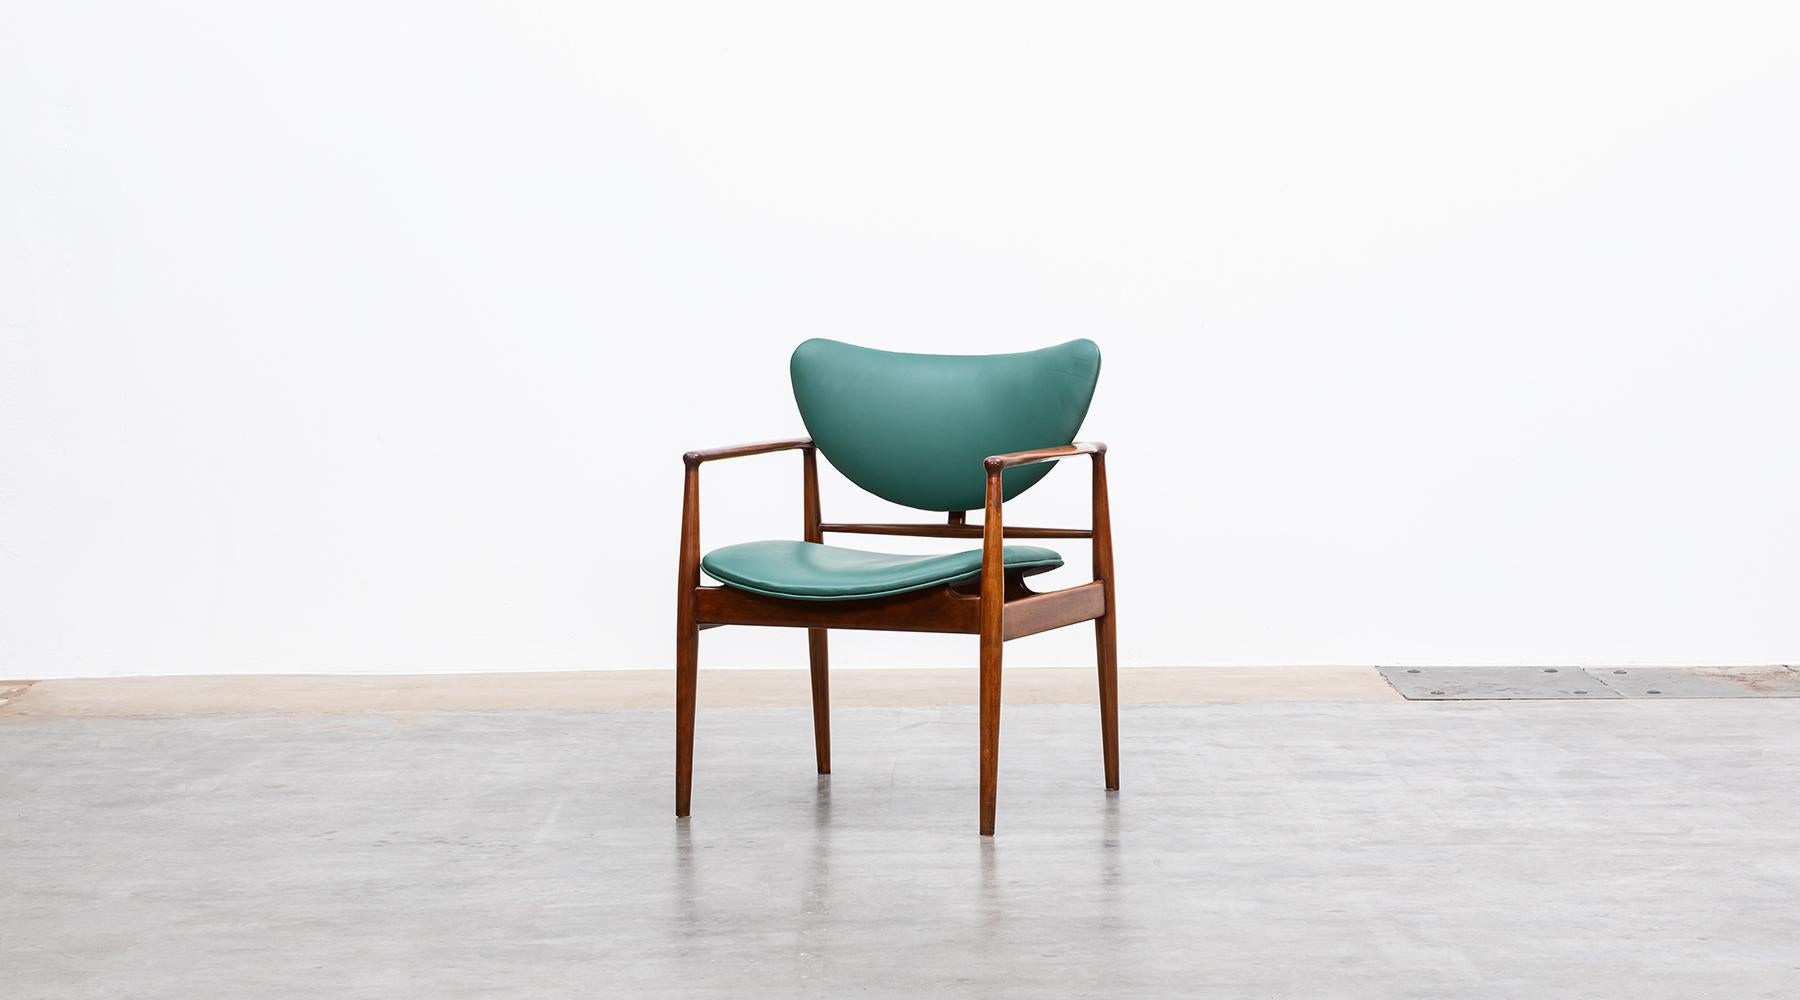 Mid-Century Modern 1950s Teak and green faux leather Chair by Finn Juhl For Sale